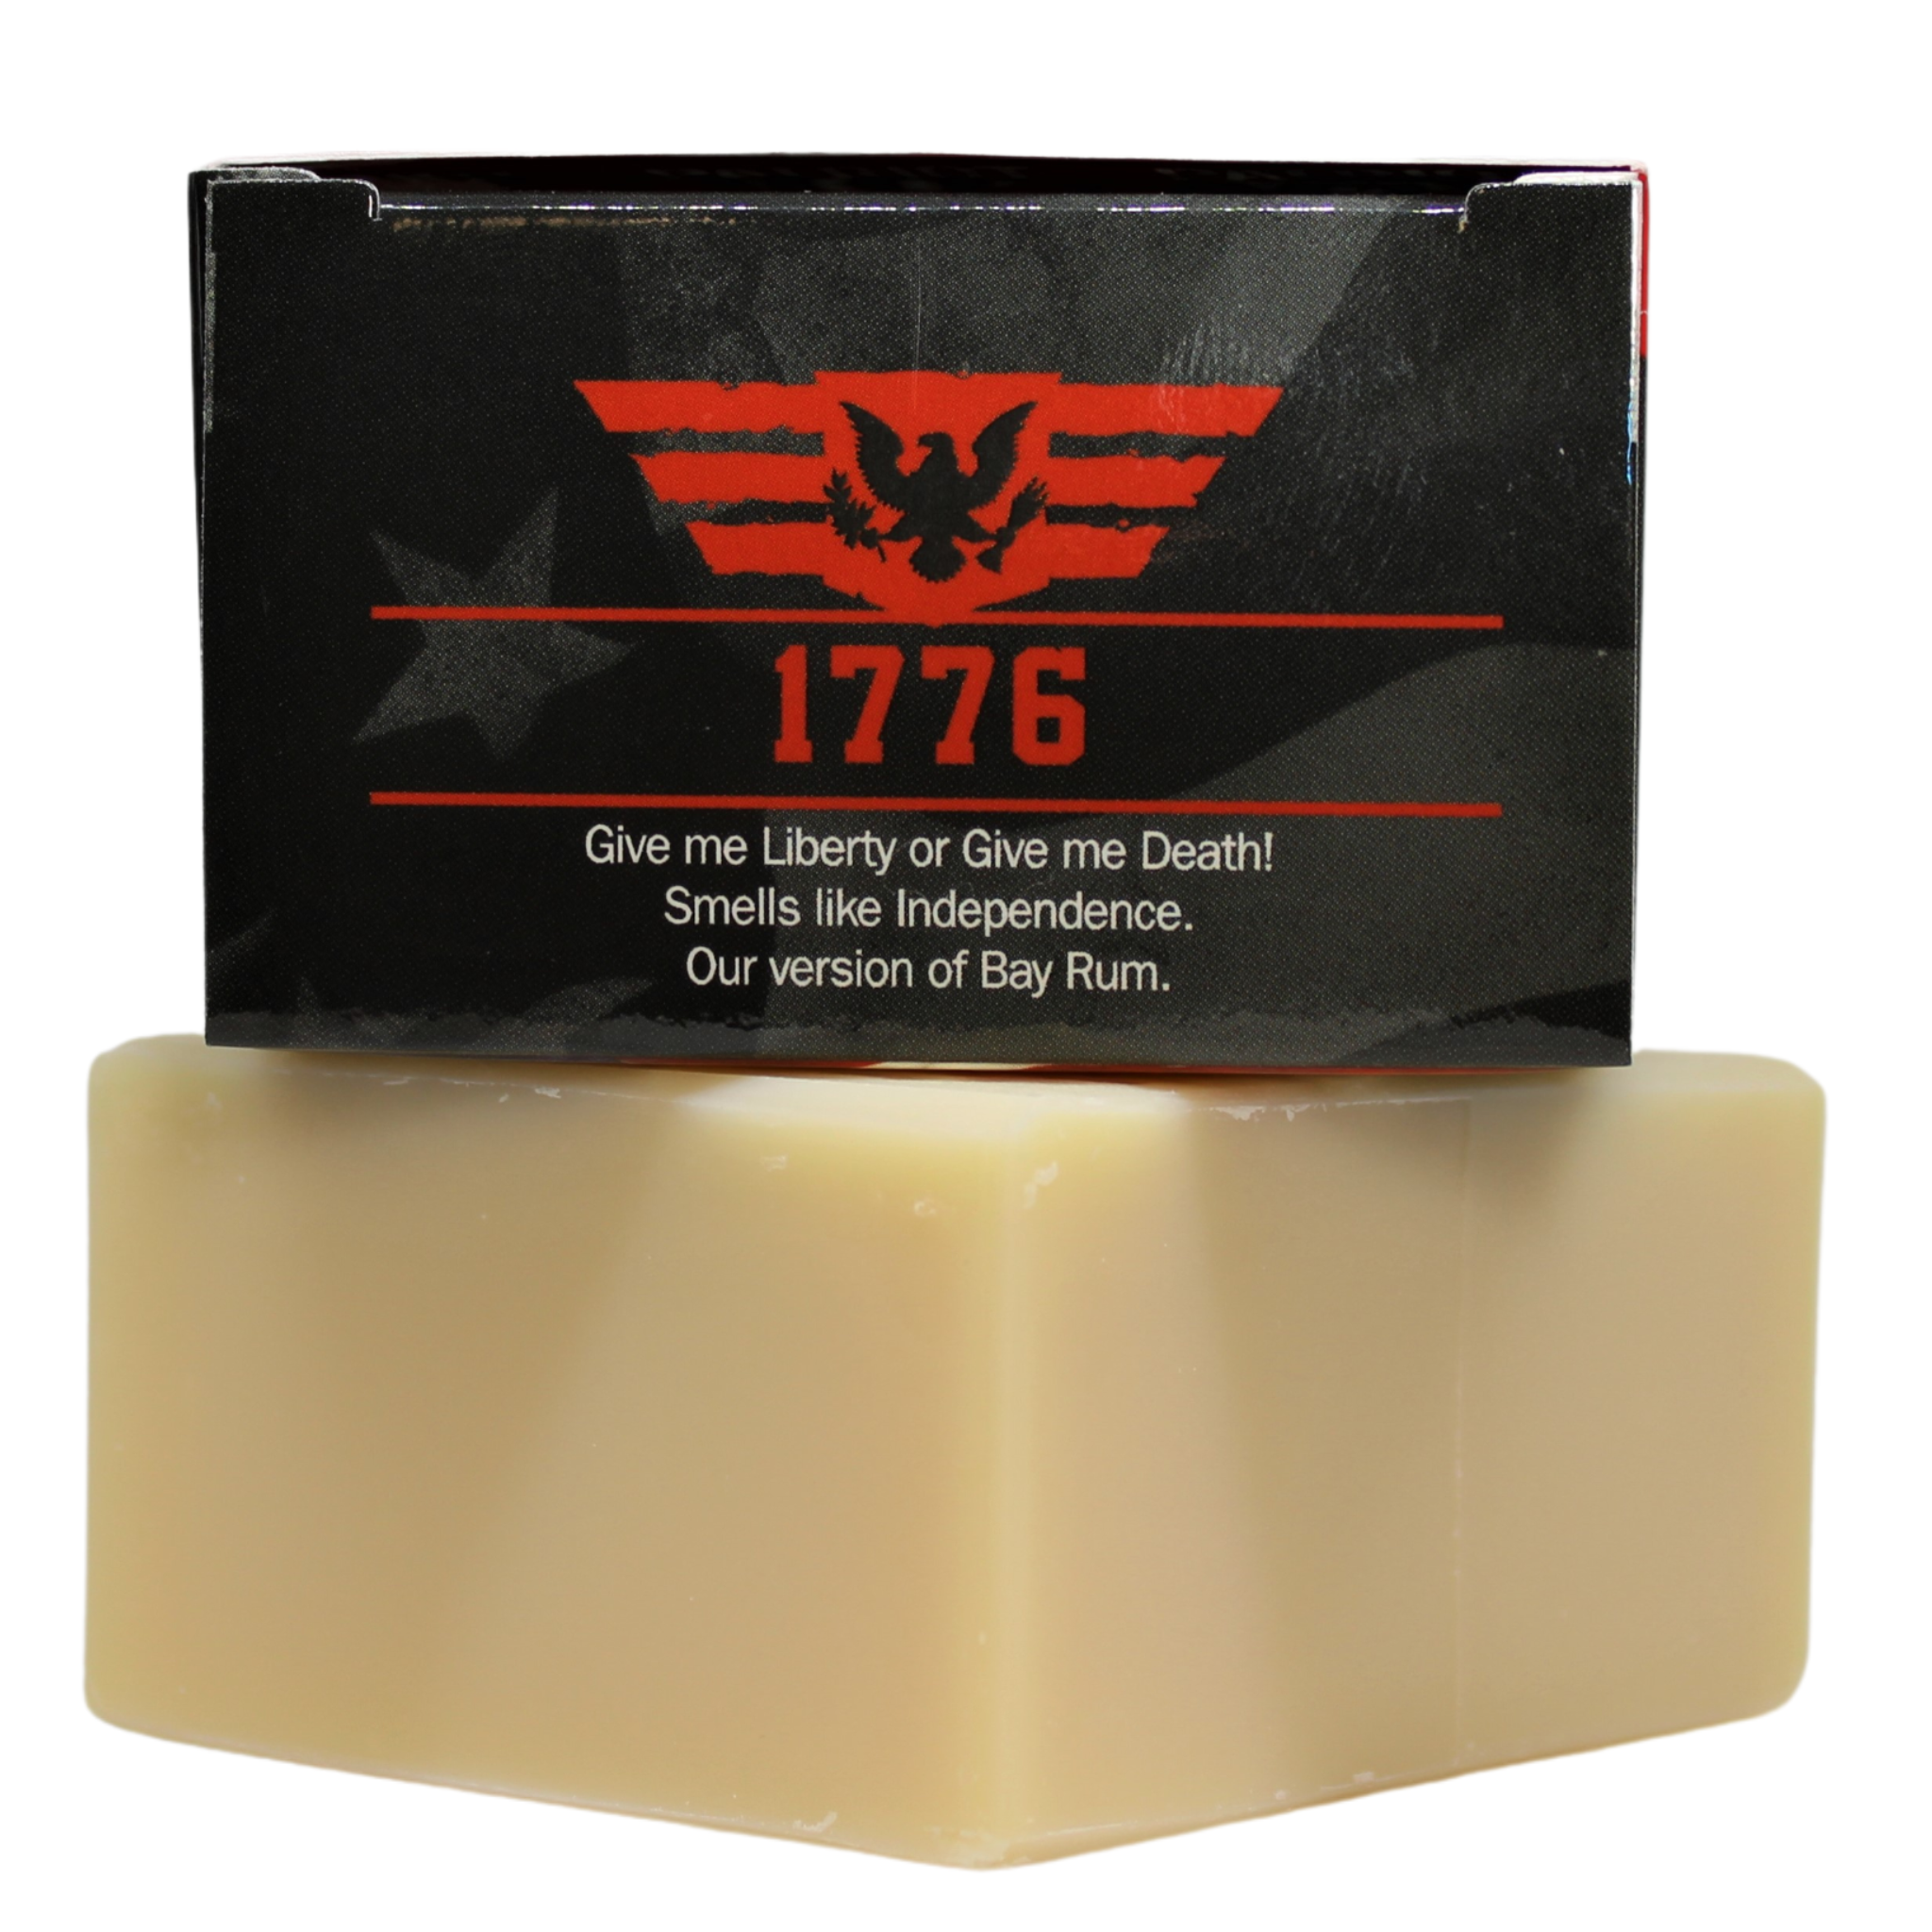 Bay Rum Natural Soap for Men  Read About the Best Bay Rum Shave Soap